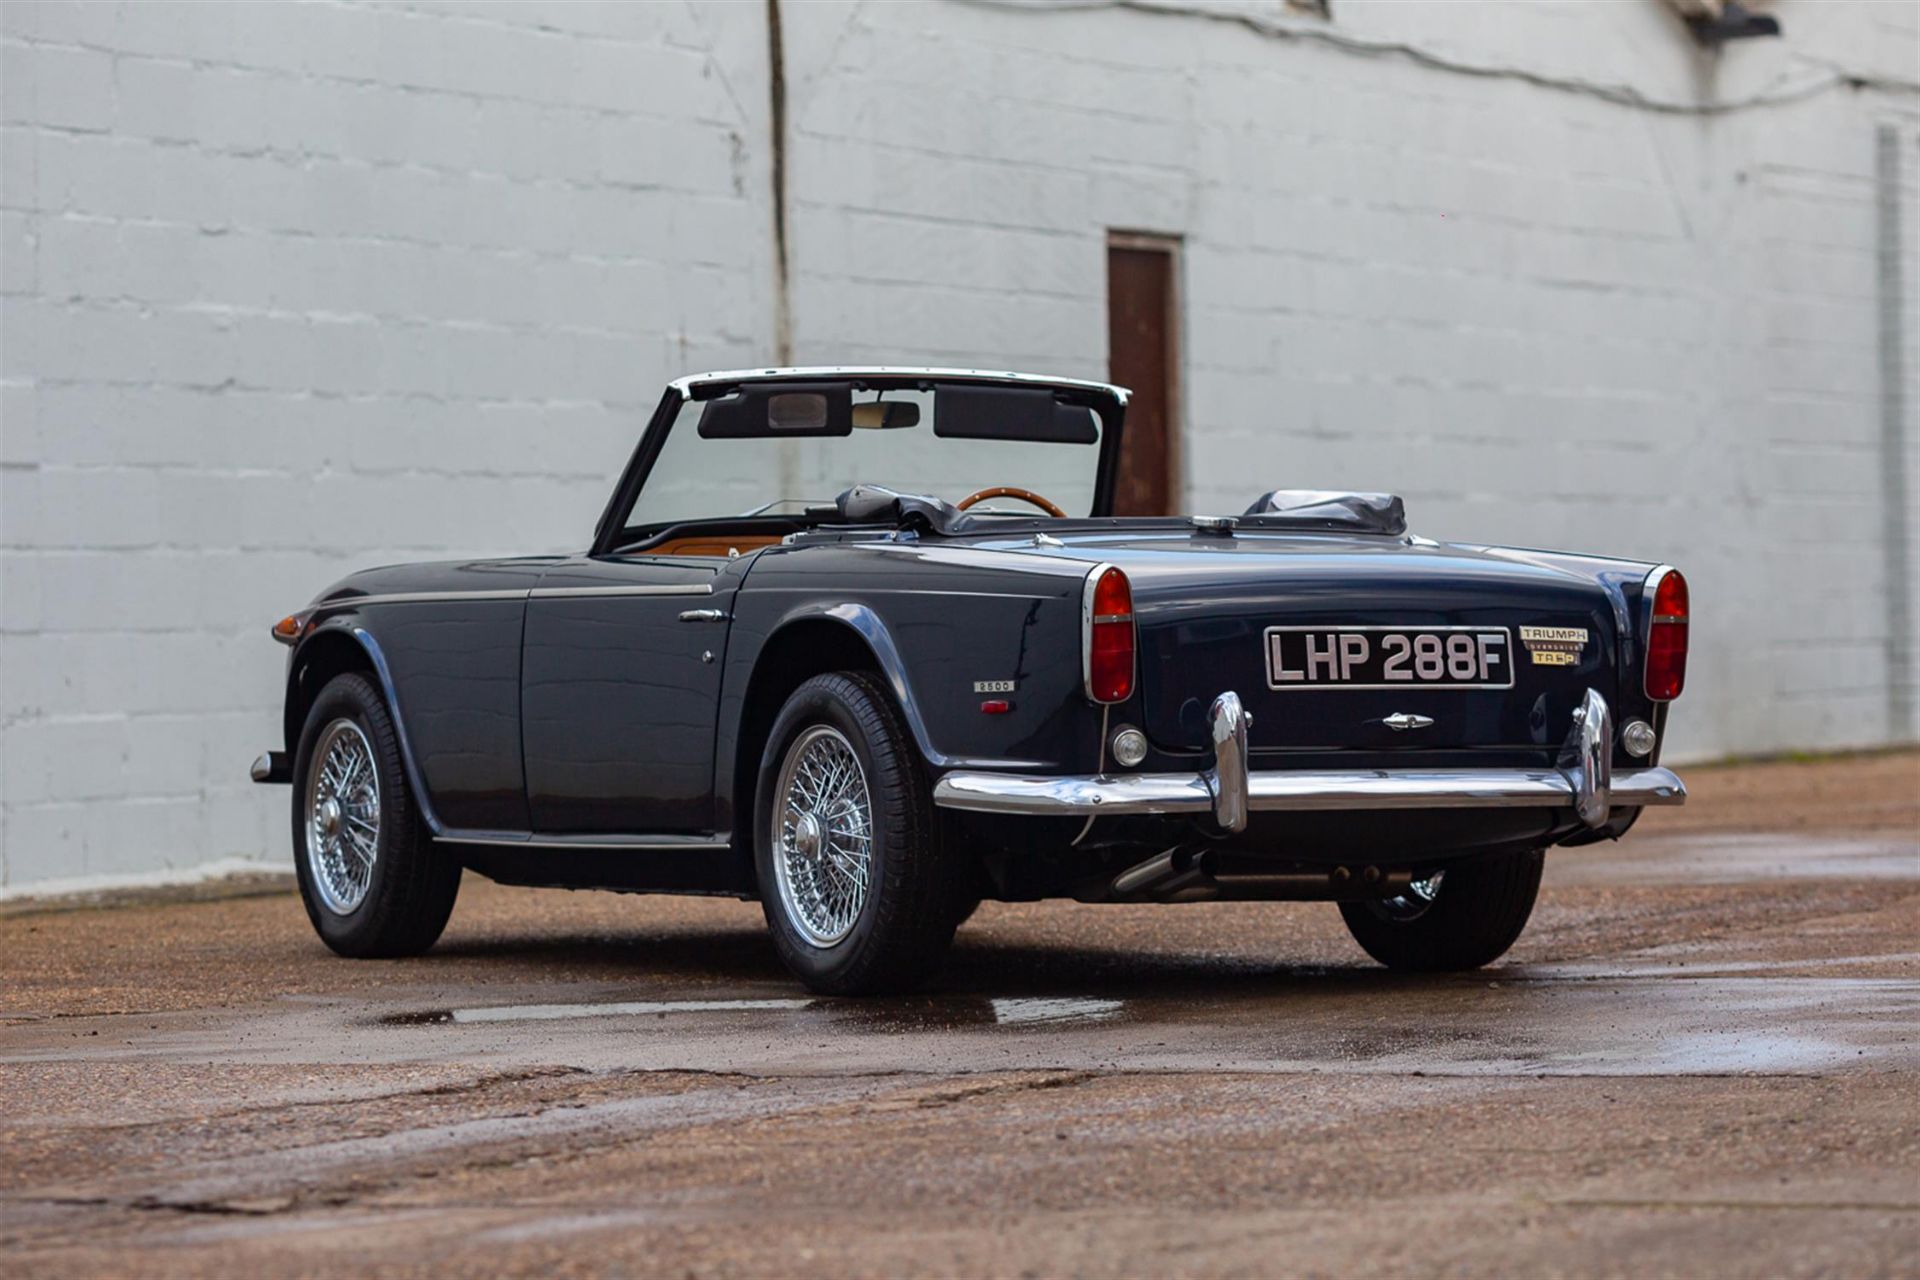 1967 Triumph TR5 - The First Ever TR5 - Image 4 of 10